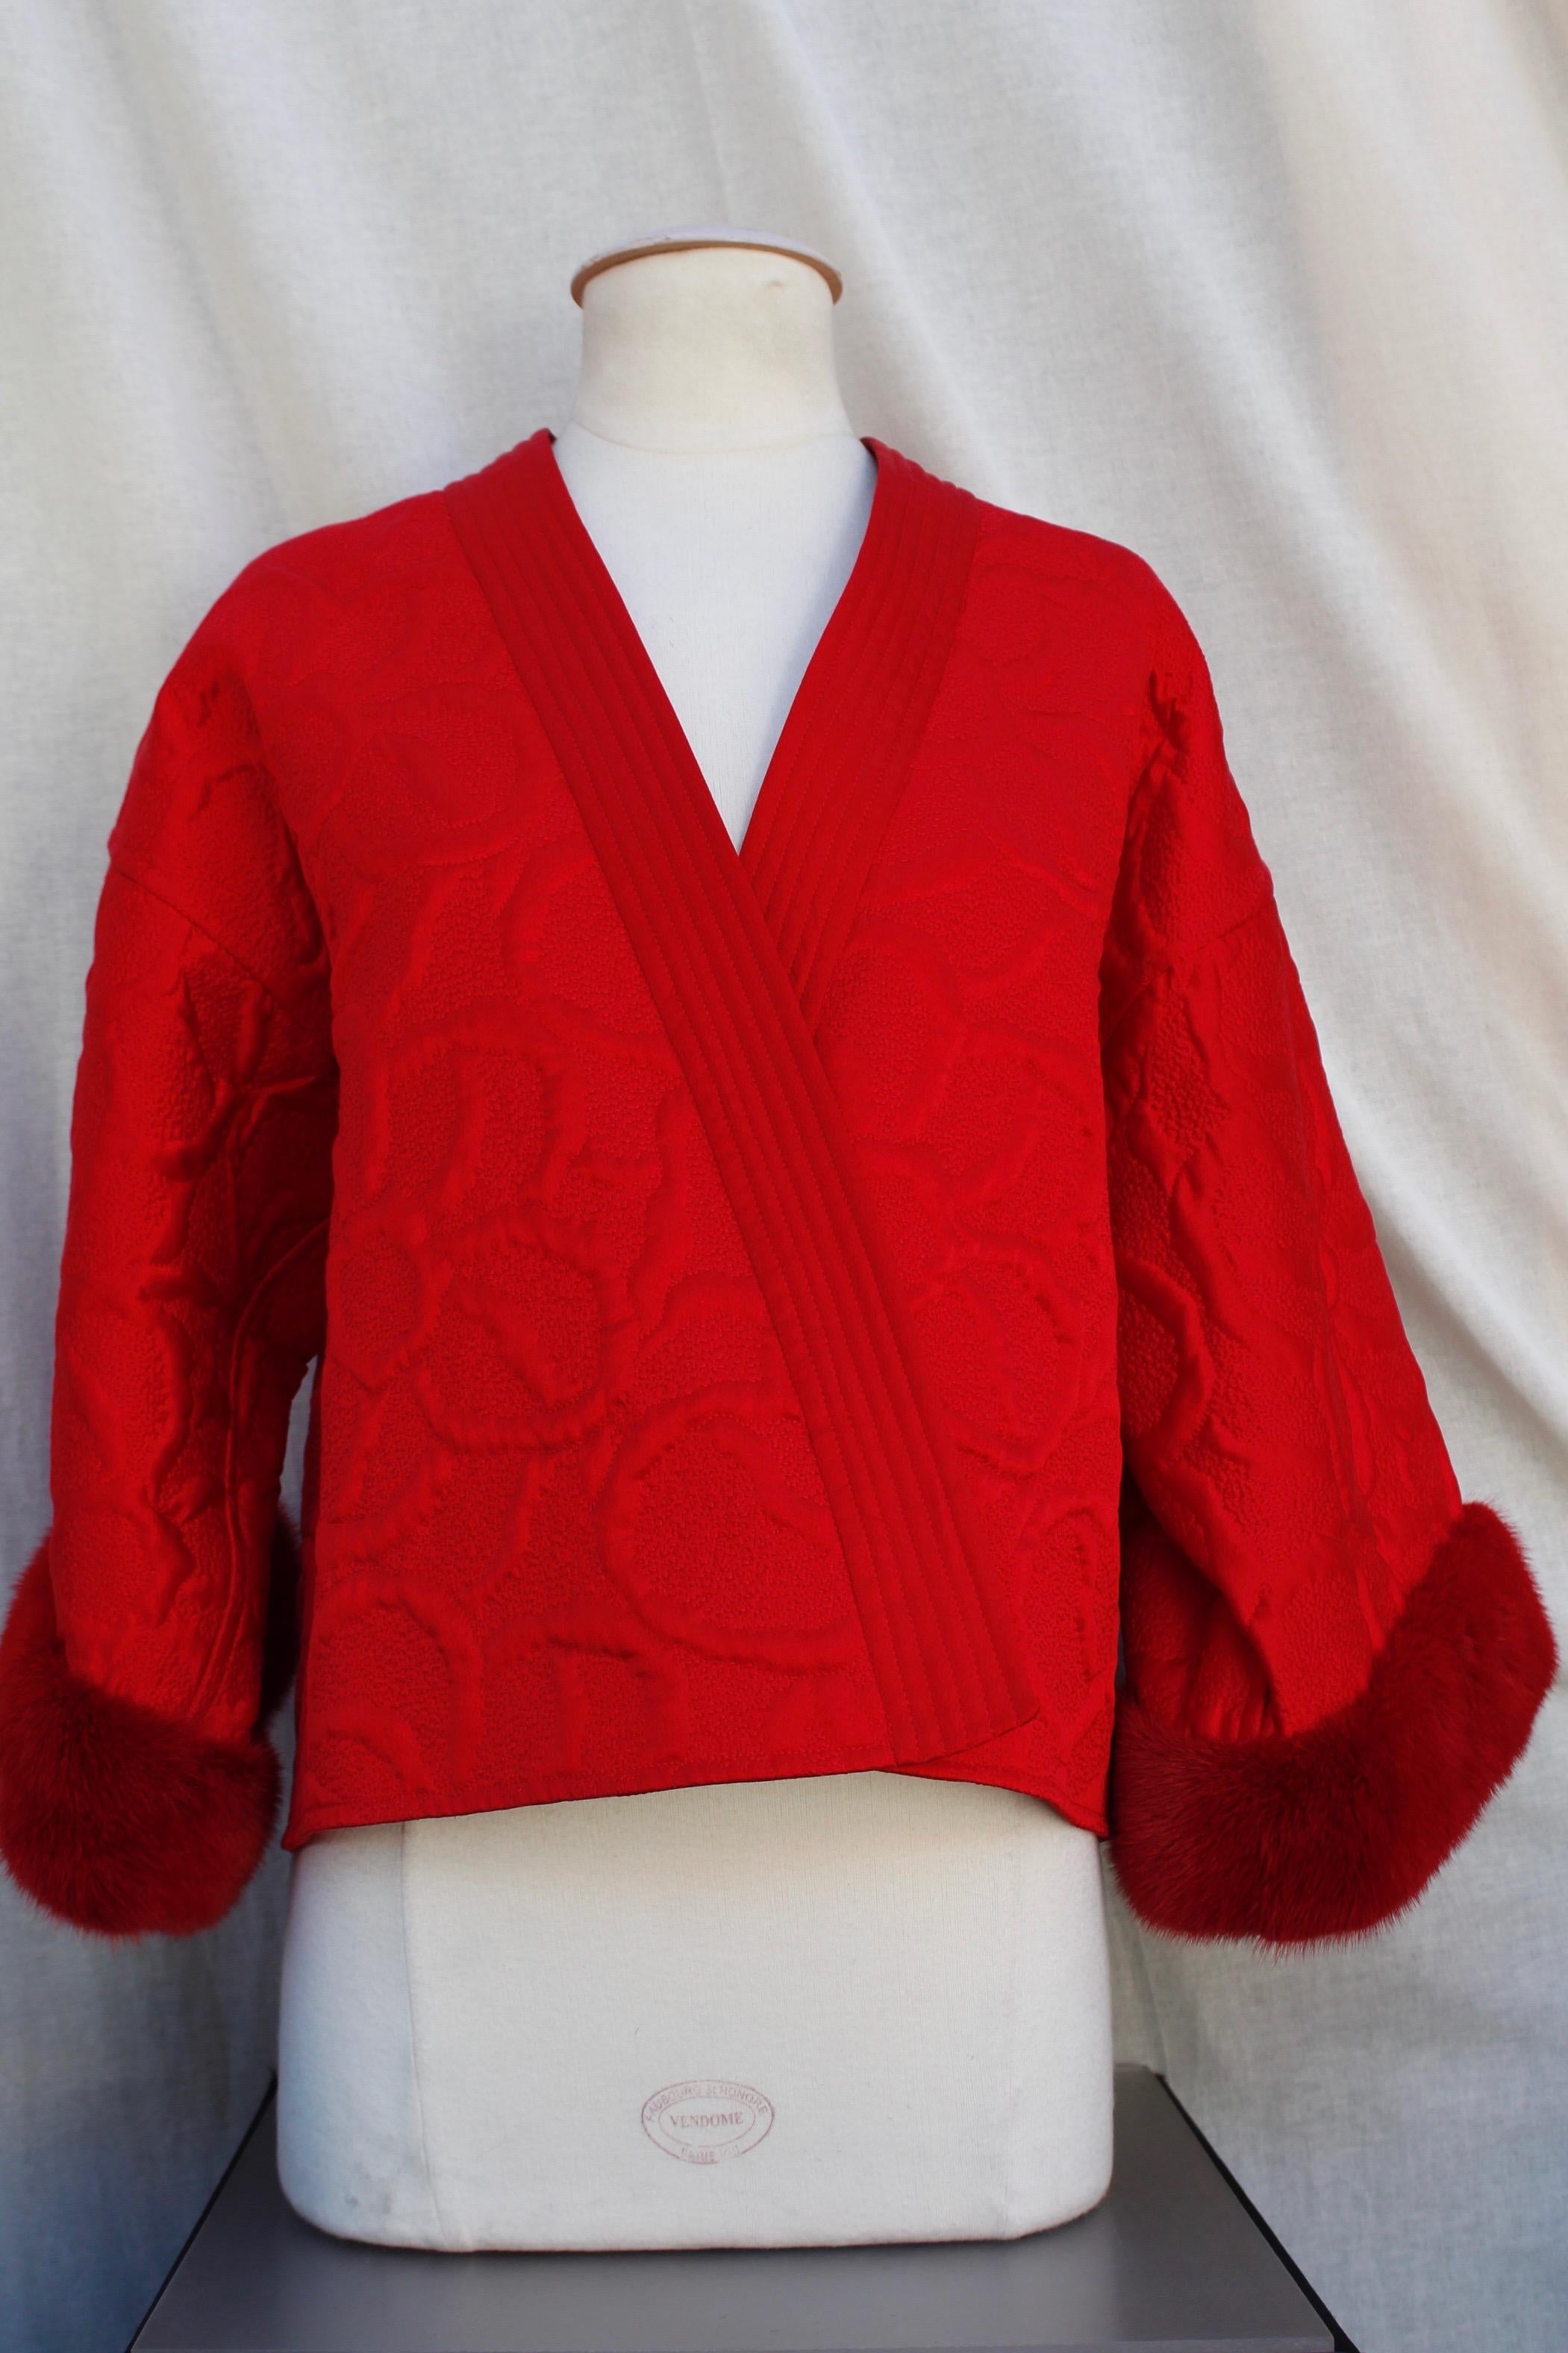 VALENTINO BOUTIQUE – Beautiful kimono-shaped short jacket with three-fourth pagoda sleeves and openings under the arms. It is composed of embossed over stitched red satin representing relief flowers. The cuffs are embellished with red mink.

Circa